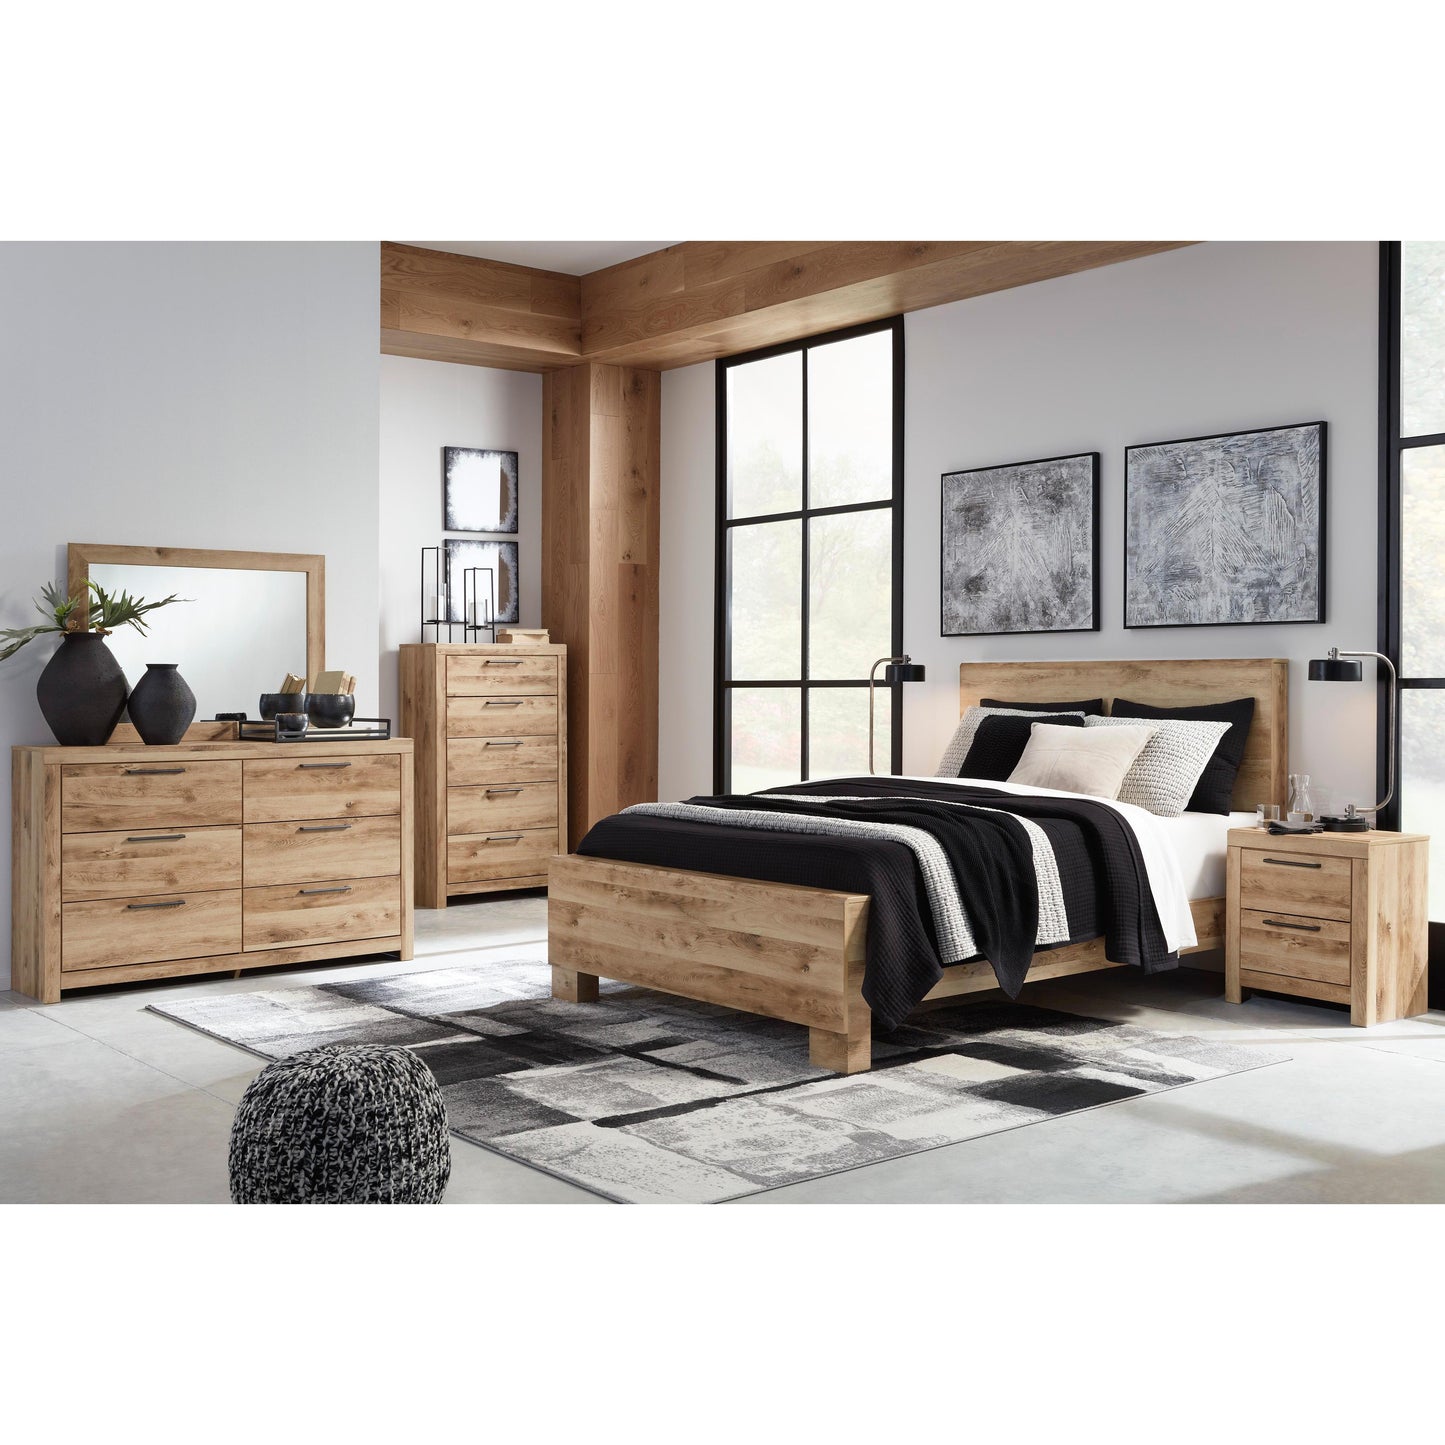 Signature Design by Ashley Hyanna B1050B37 5 pc Queen Panel Bedroom Set IMAGE 1